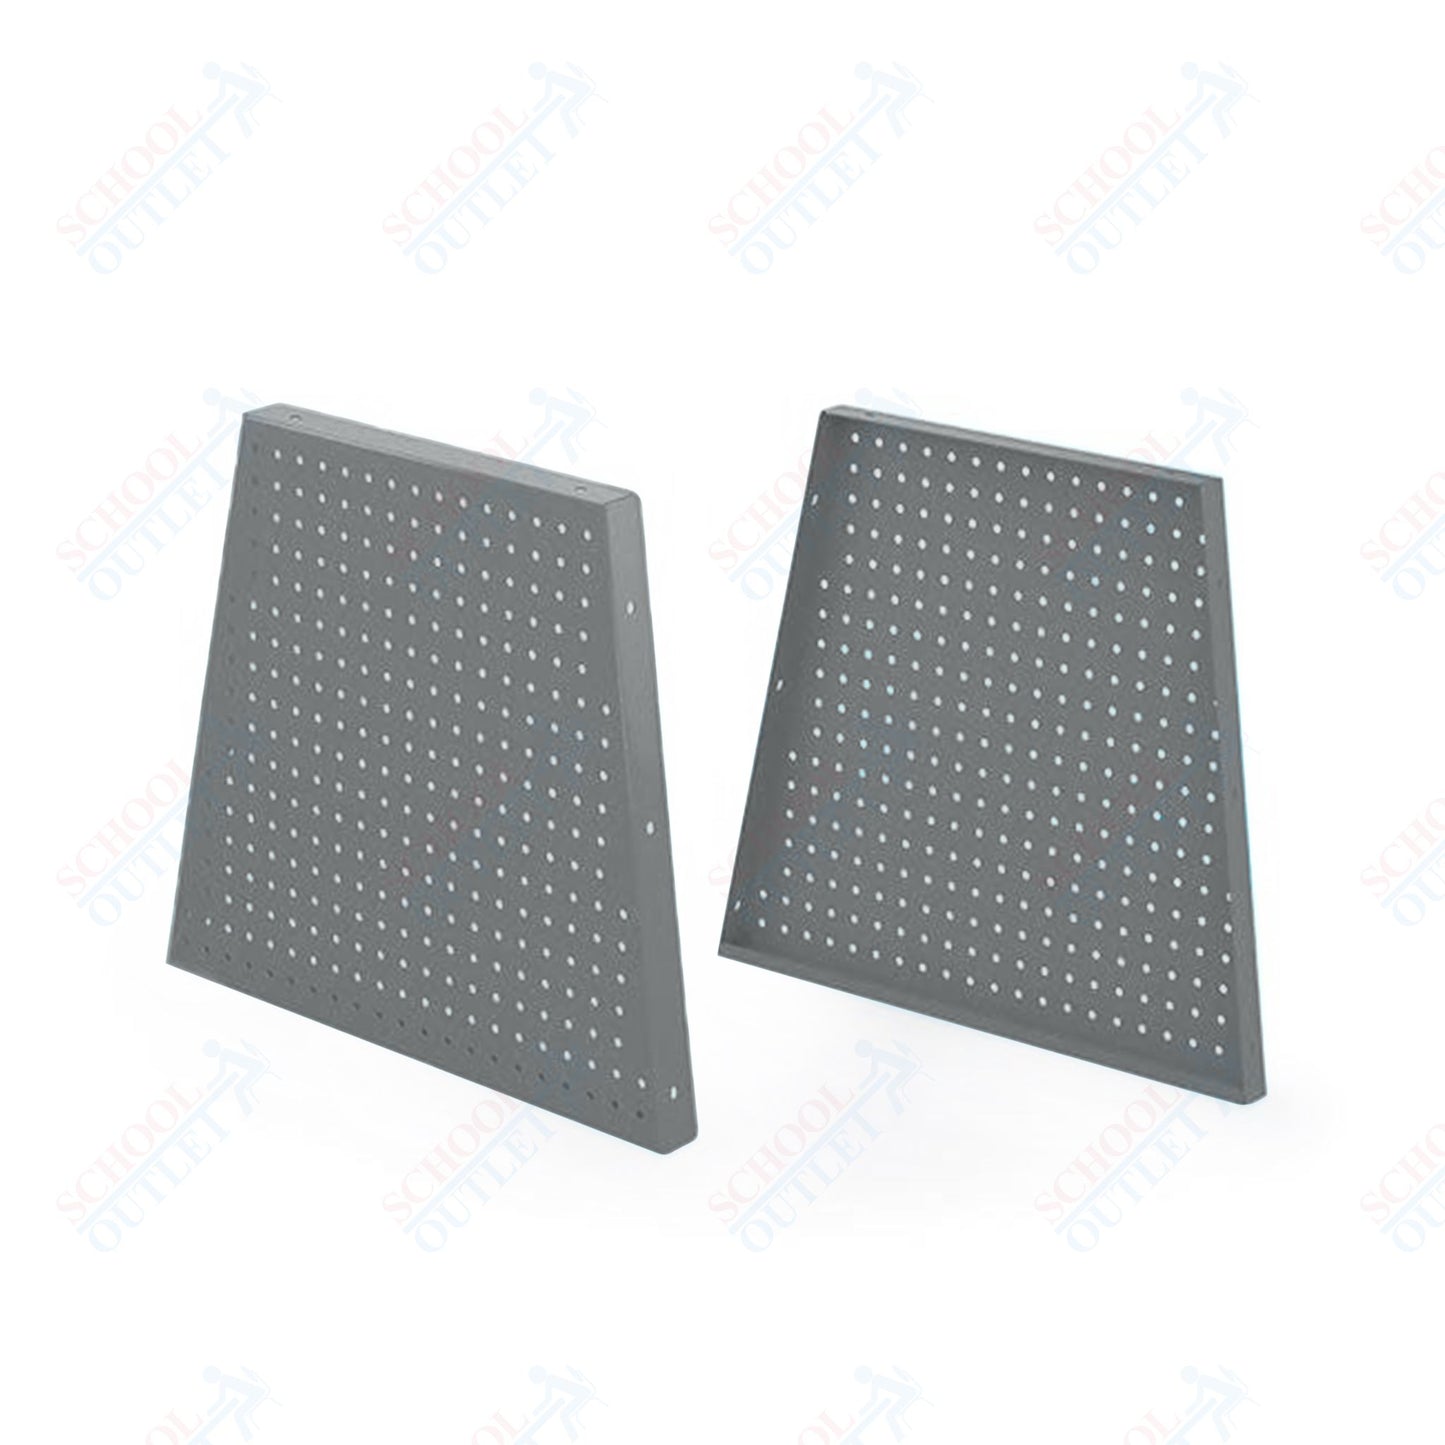 Mooreco Compass Makerspace Pegboard Table Side Panels (Set of 2) - 52990